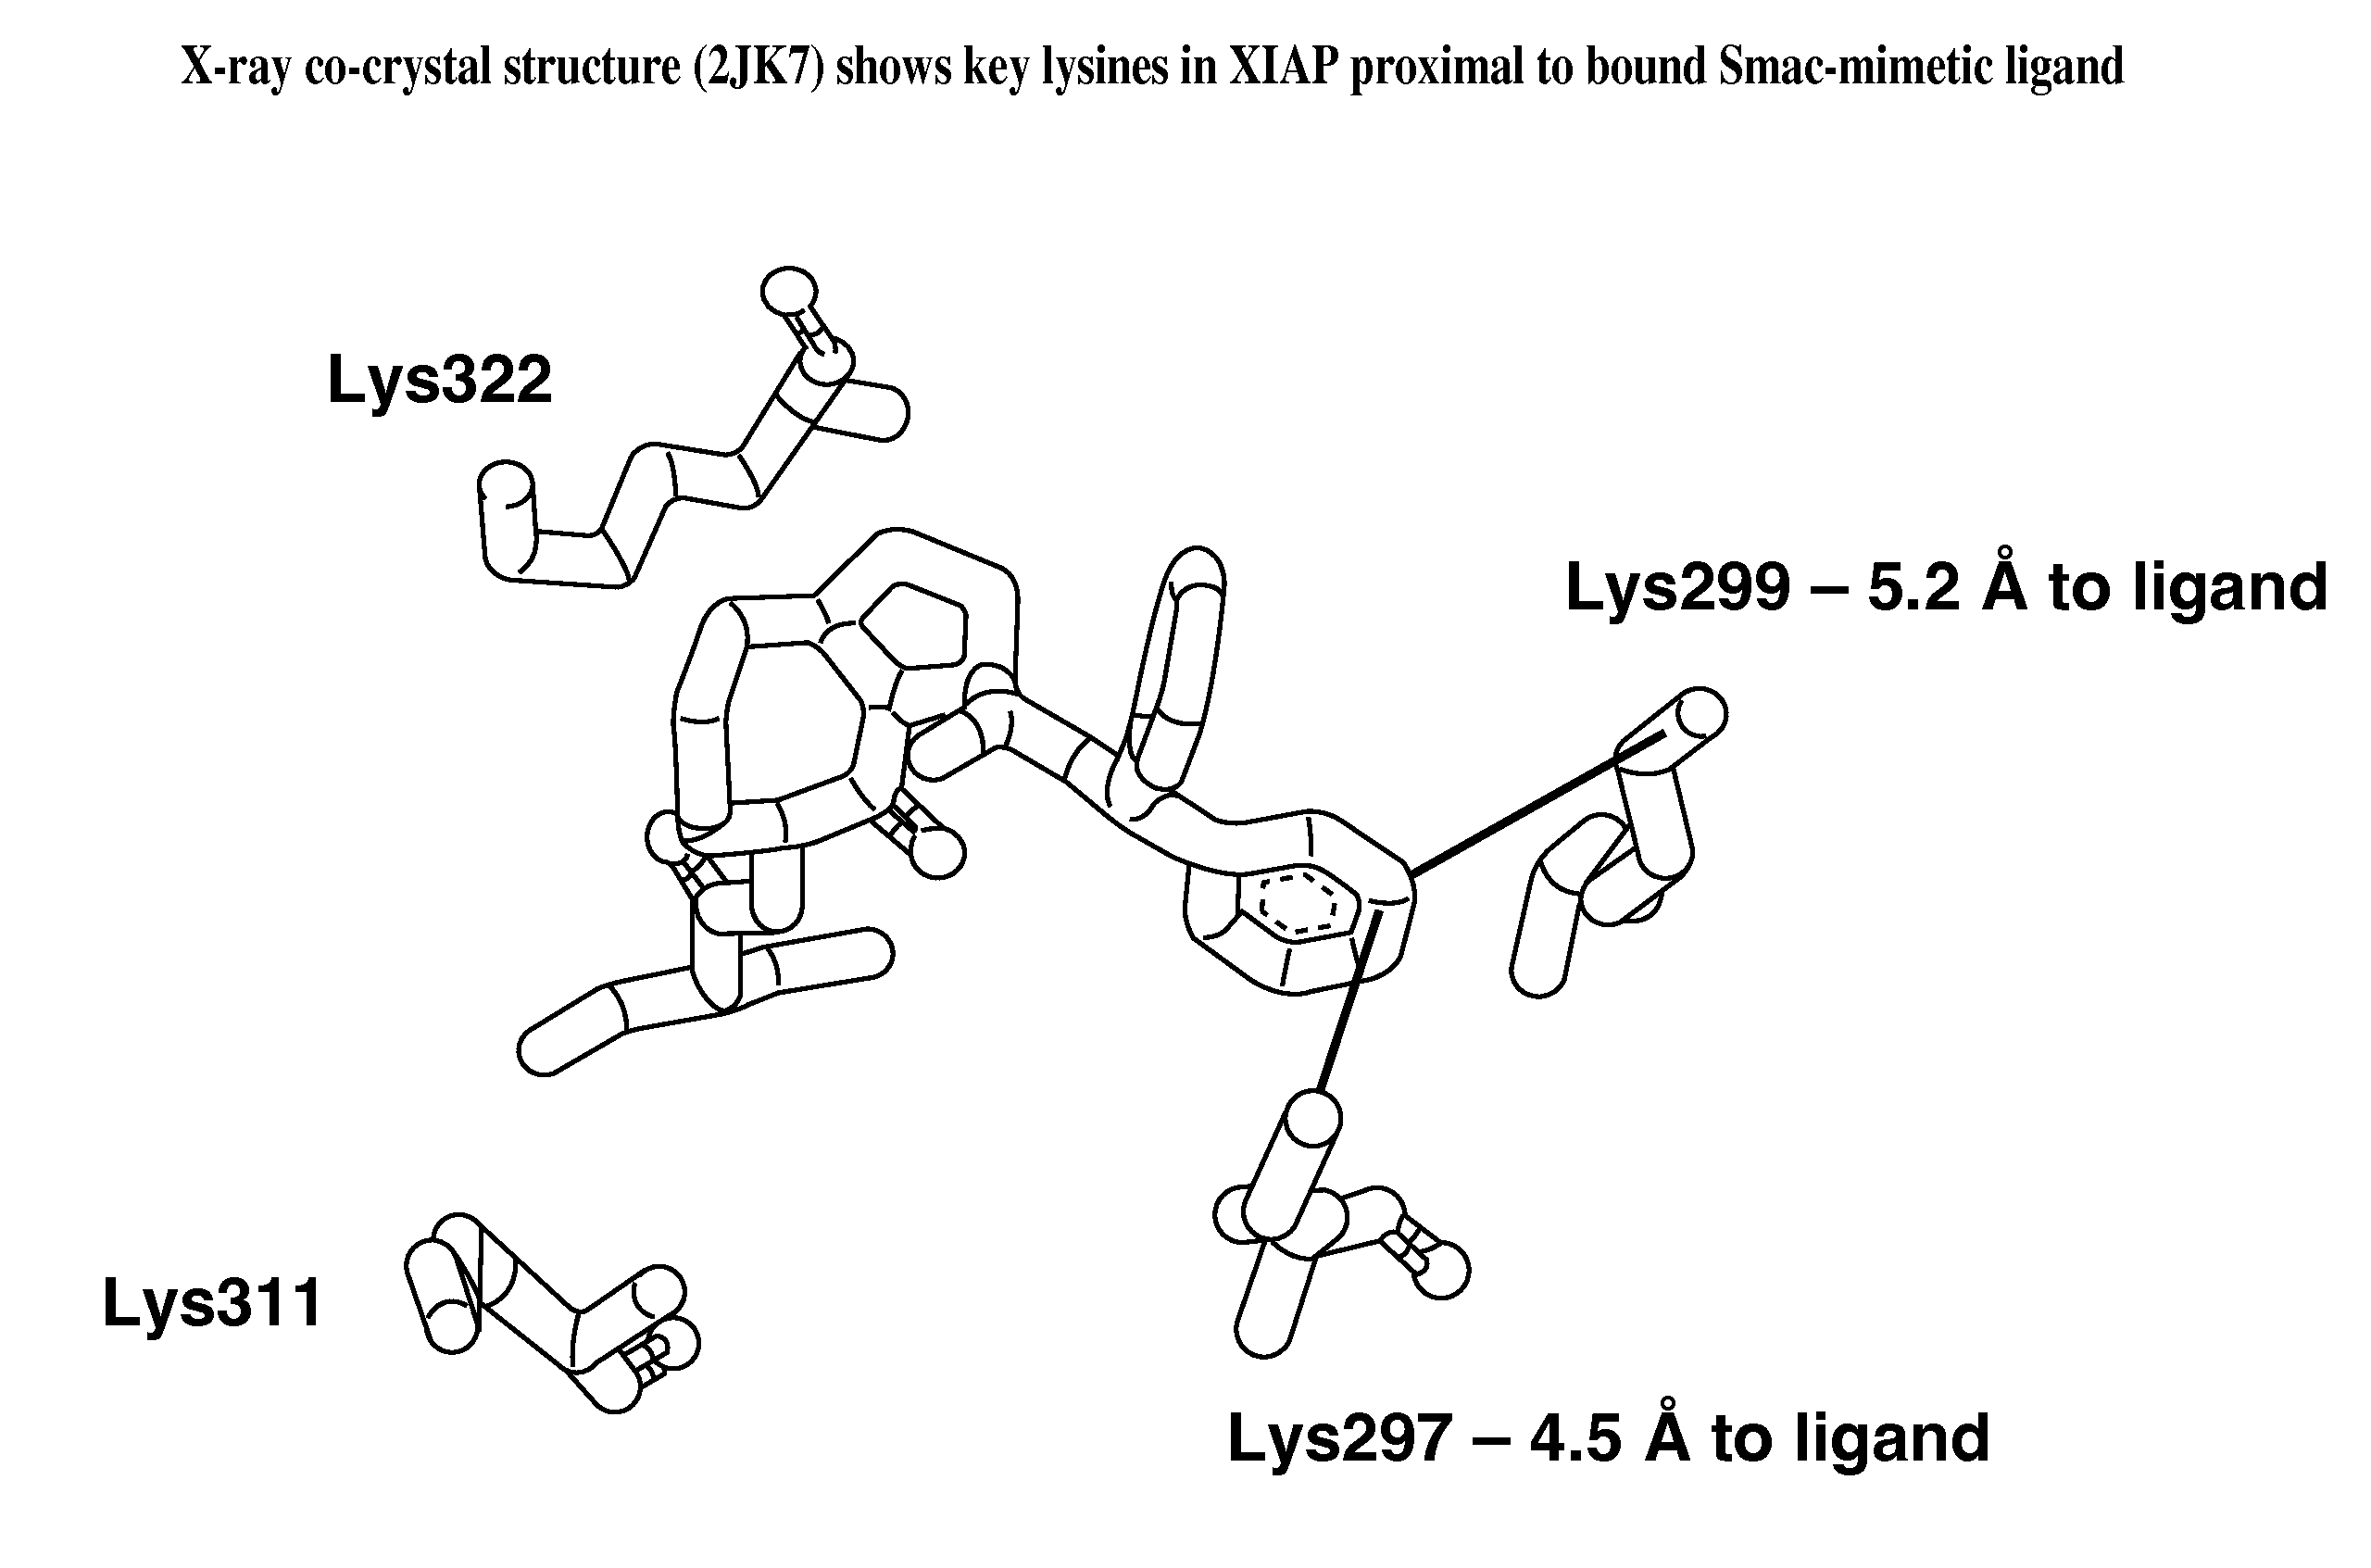 Ligand-directed covalent modification of protein